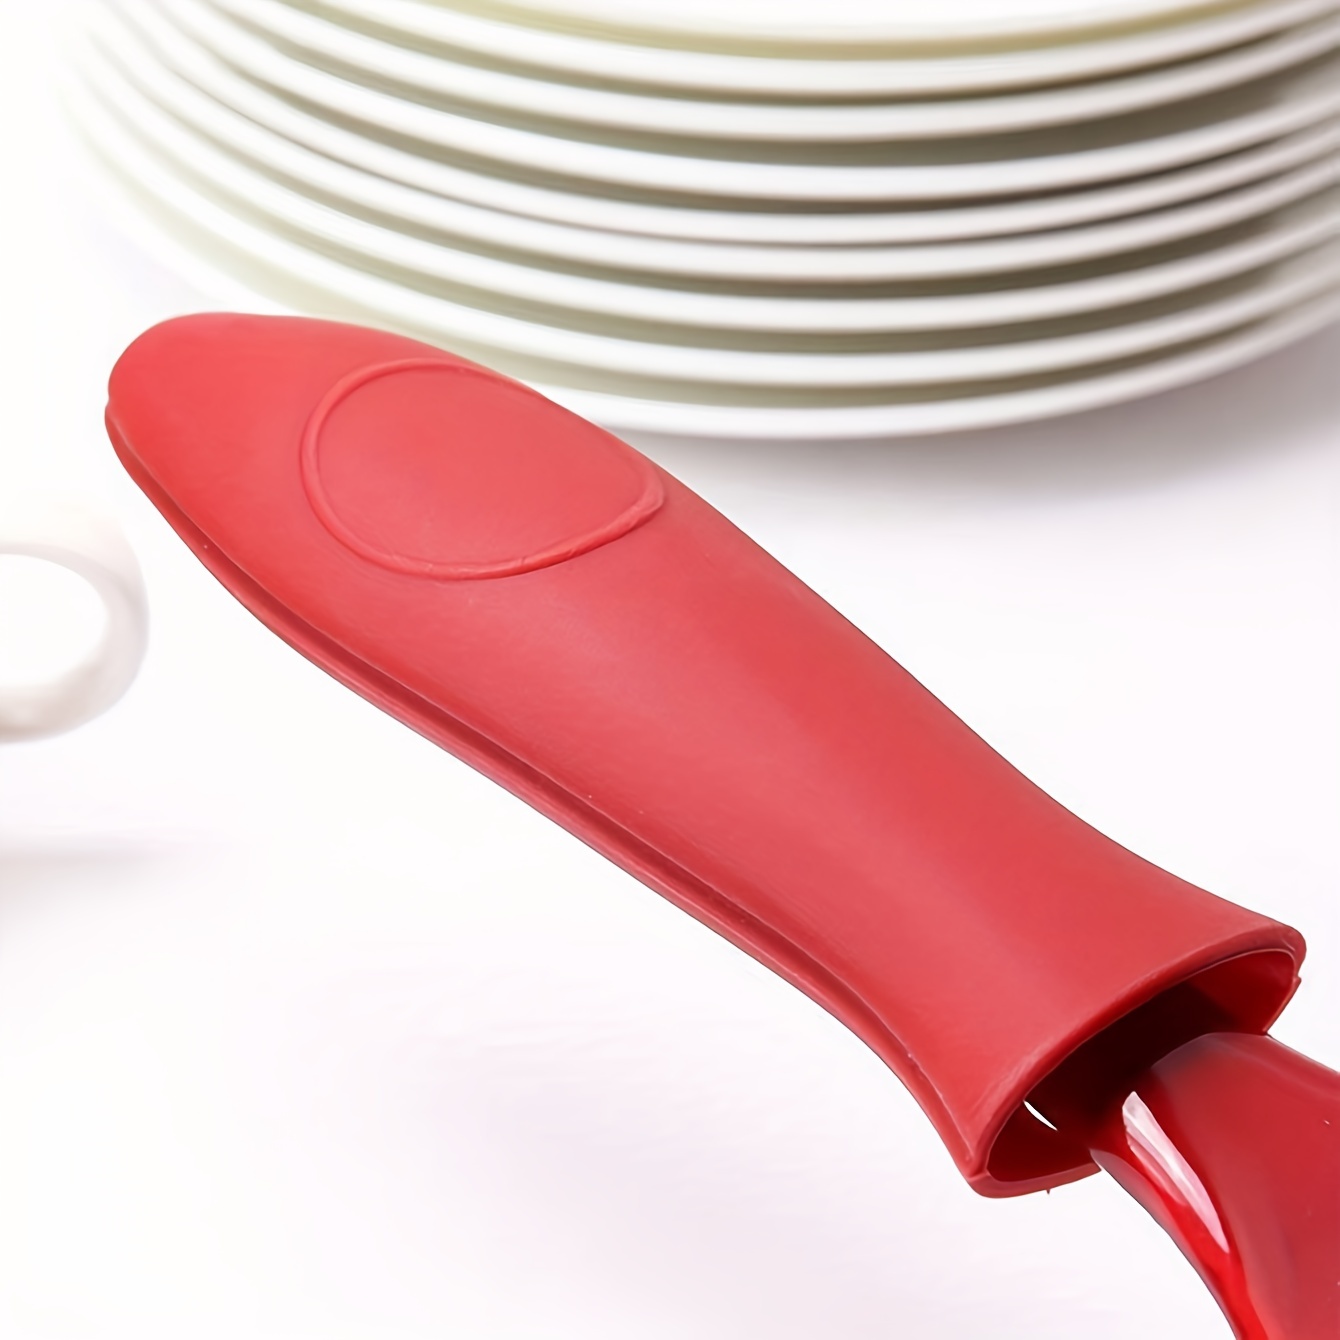 Lodge Cast Iron Red Silicone Hot Handle Holder for Skillets